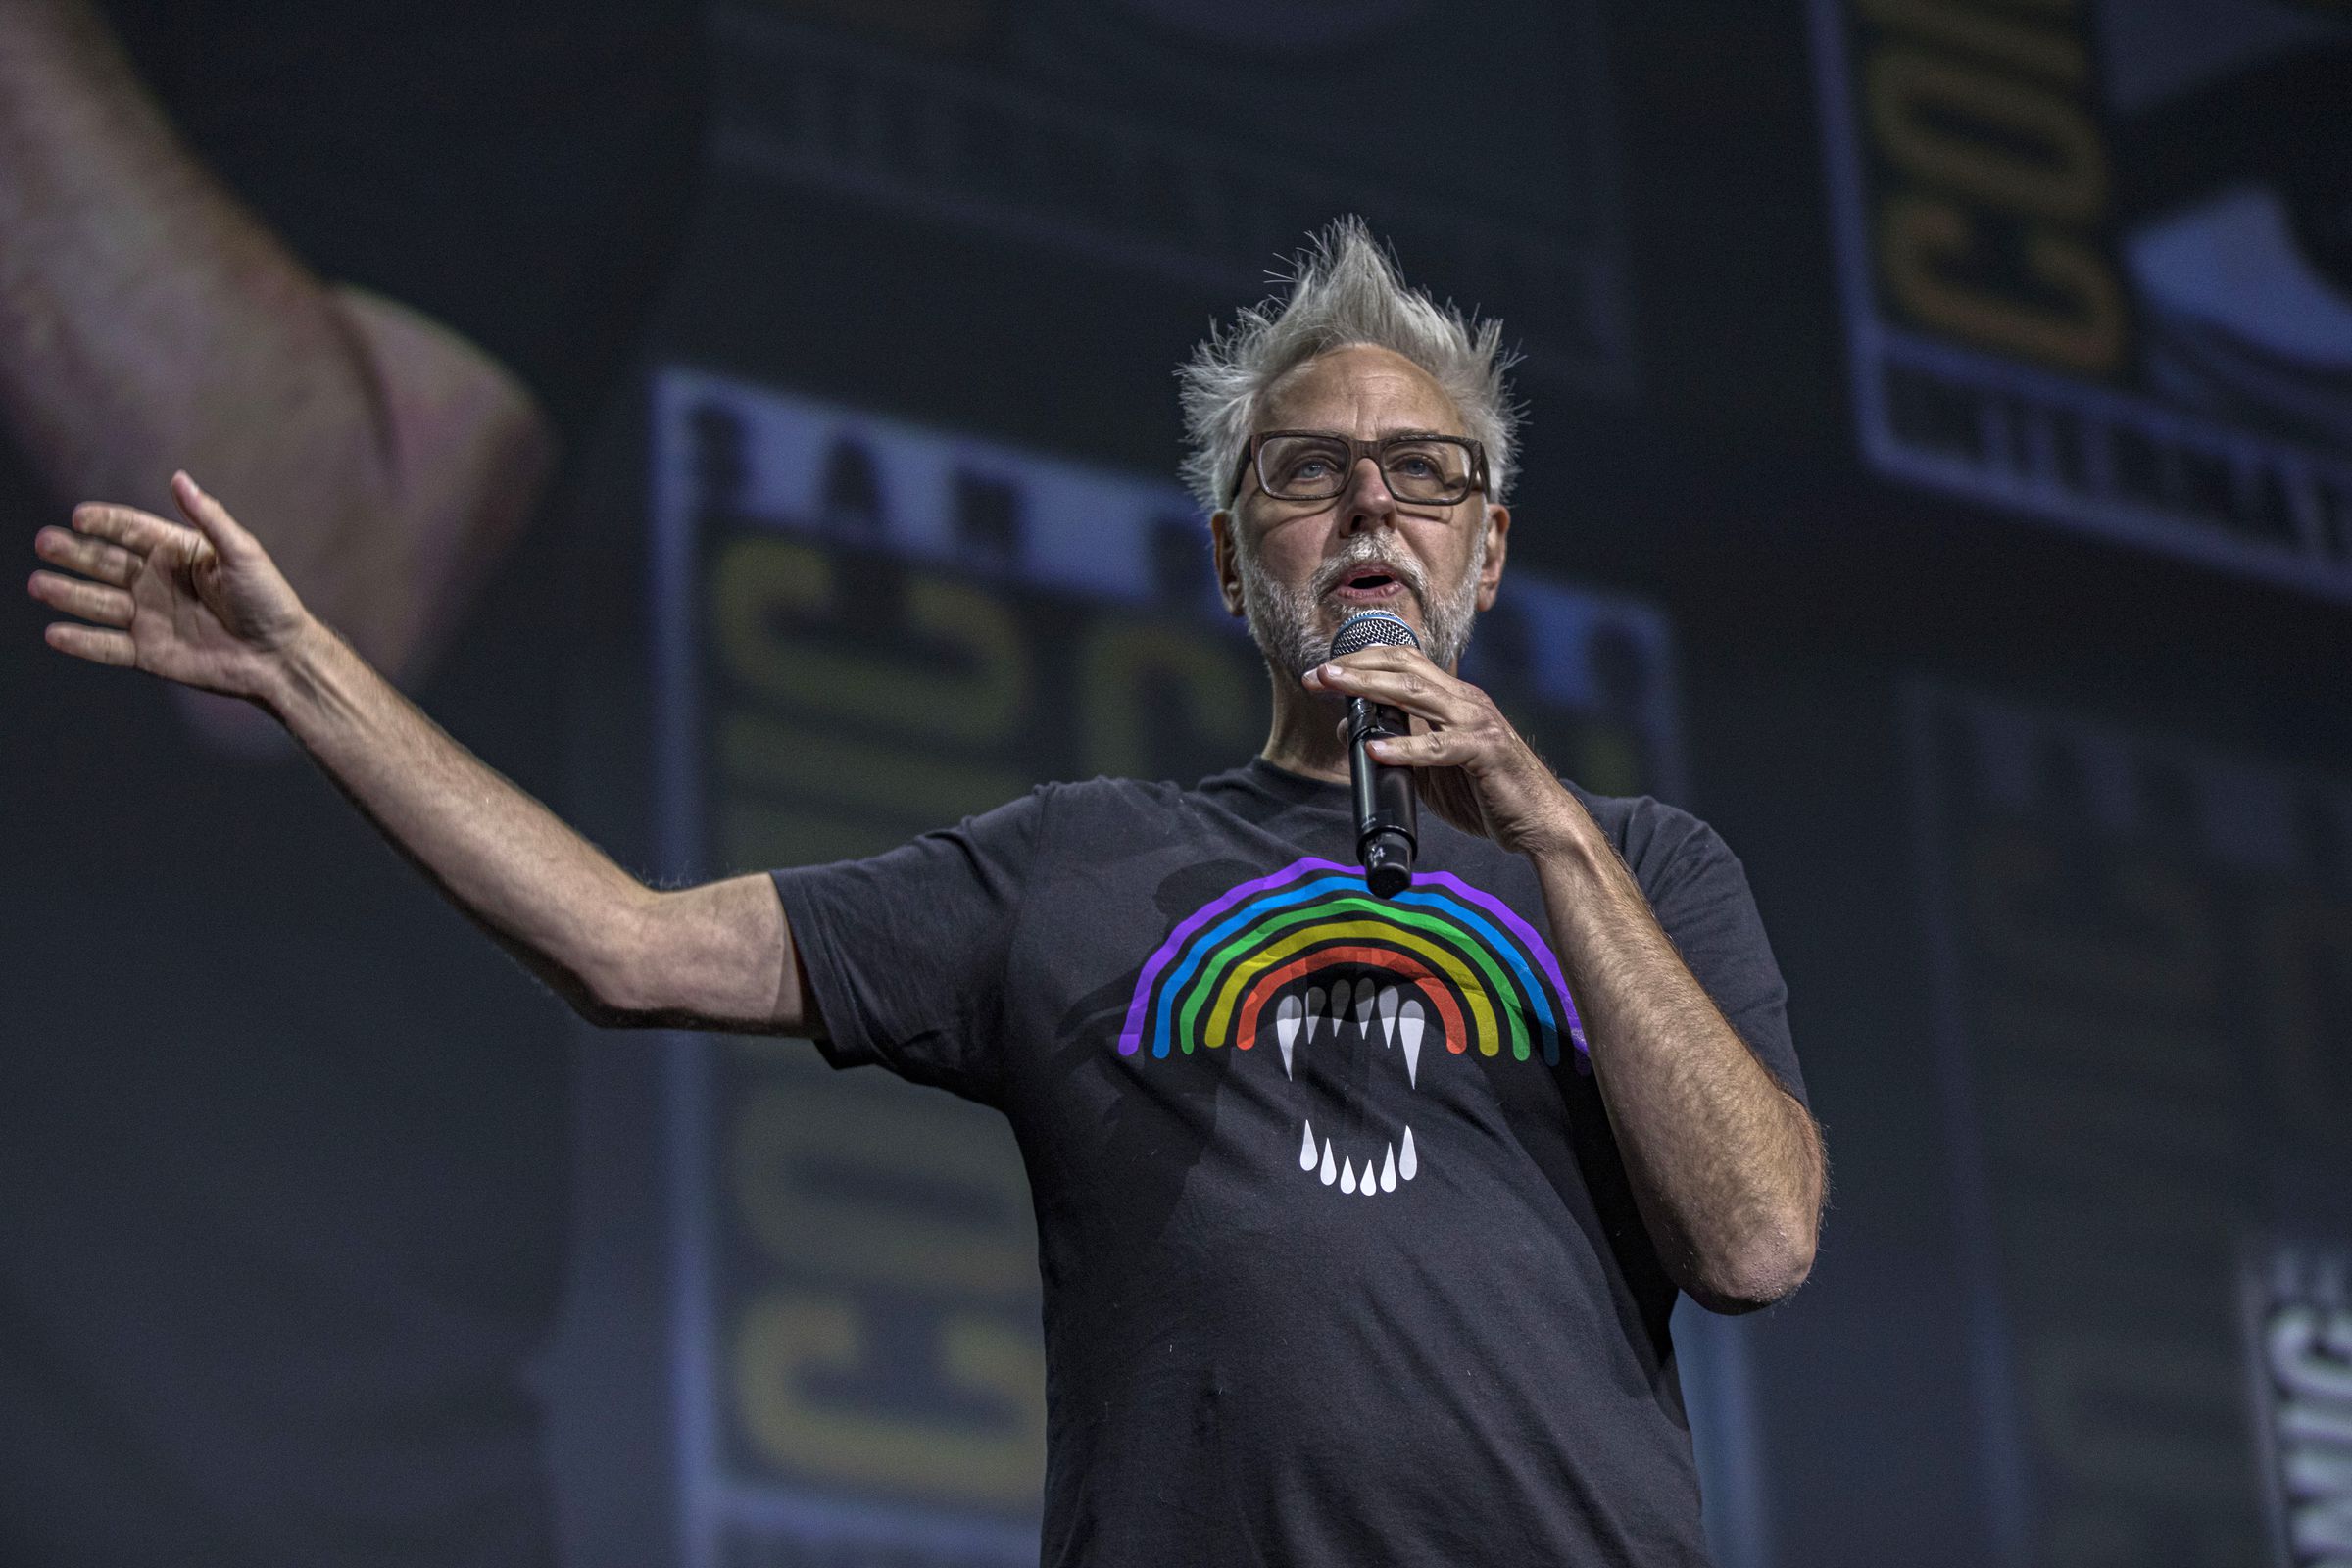 James Gunn wearing a black t-shirt with a rainbow on it as he gestures on stage during a presentation at San Diego Comic-Con in 2022.